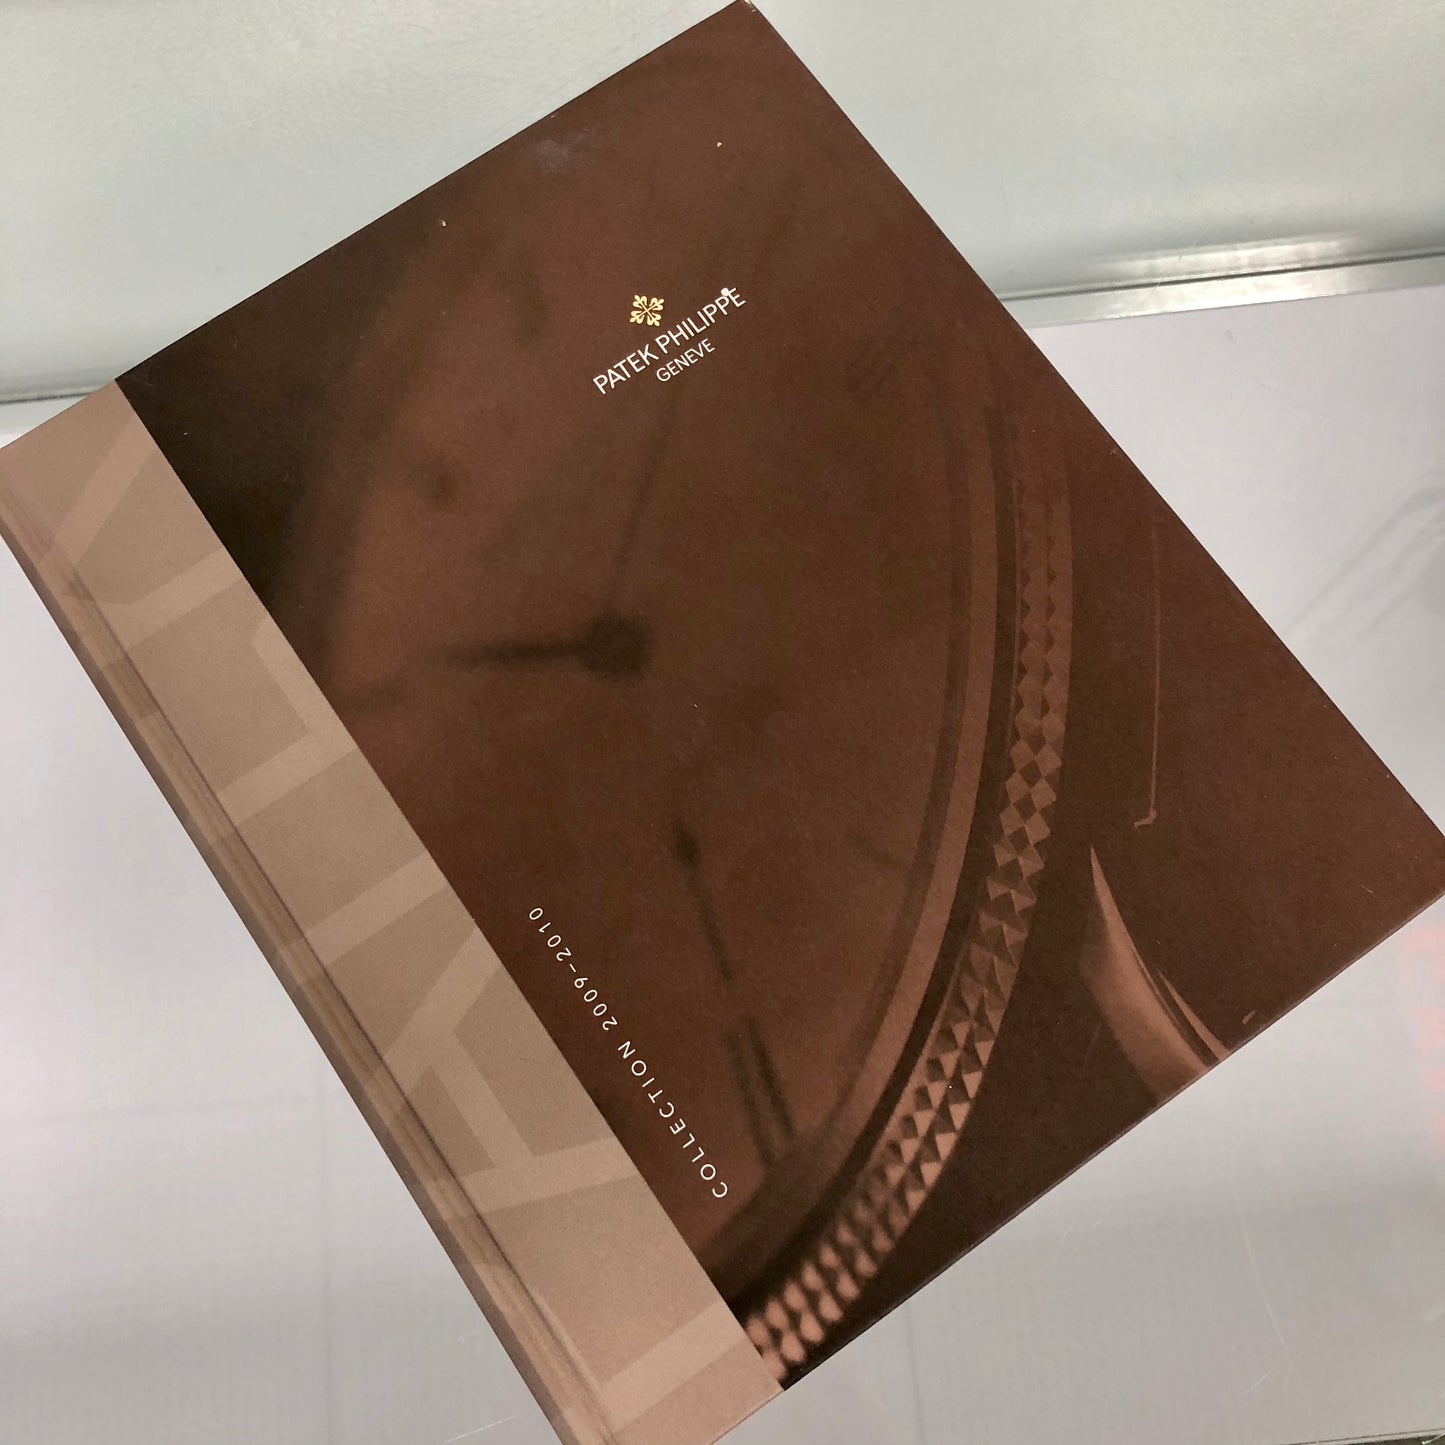 New PATEK PHILIPPE Genève Collection 2009-2010 Collectable Table Book